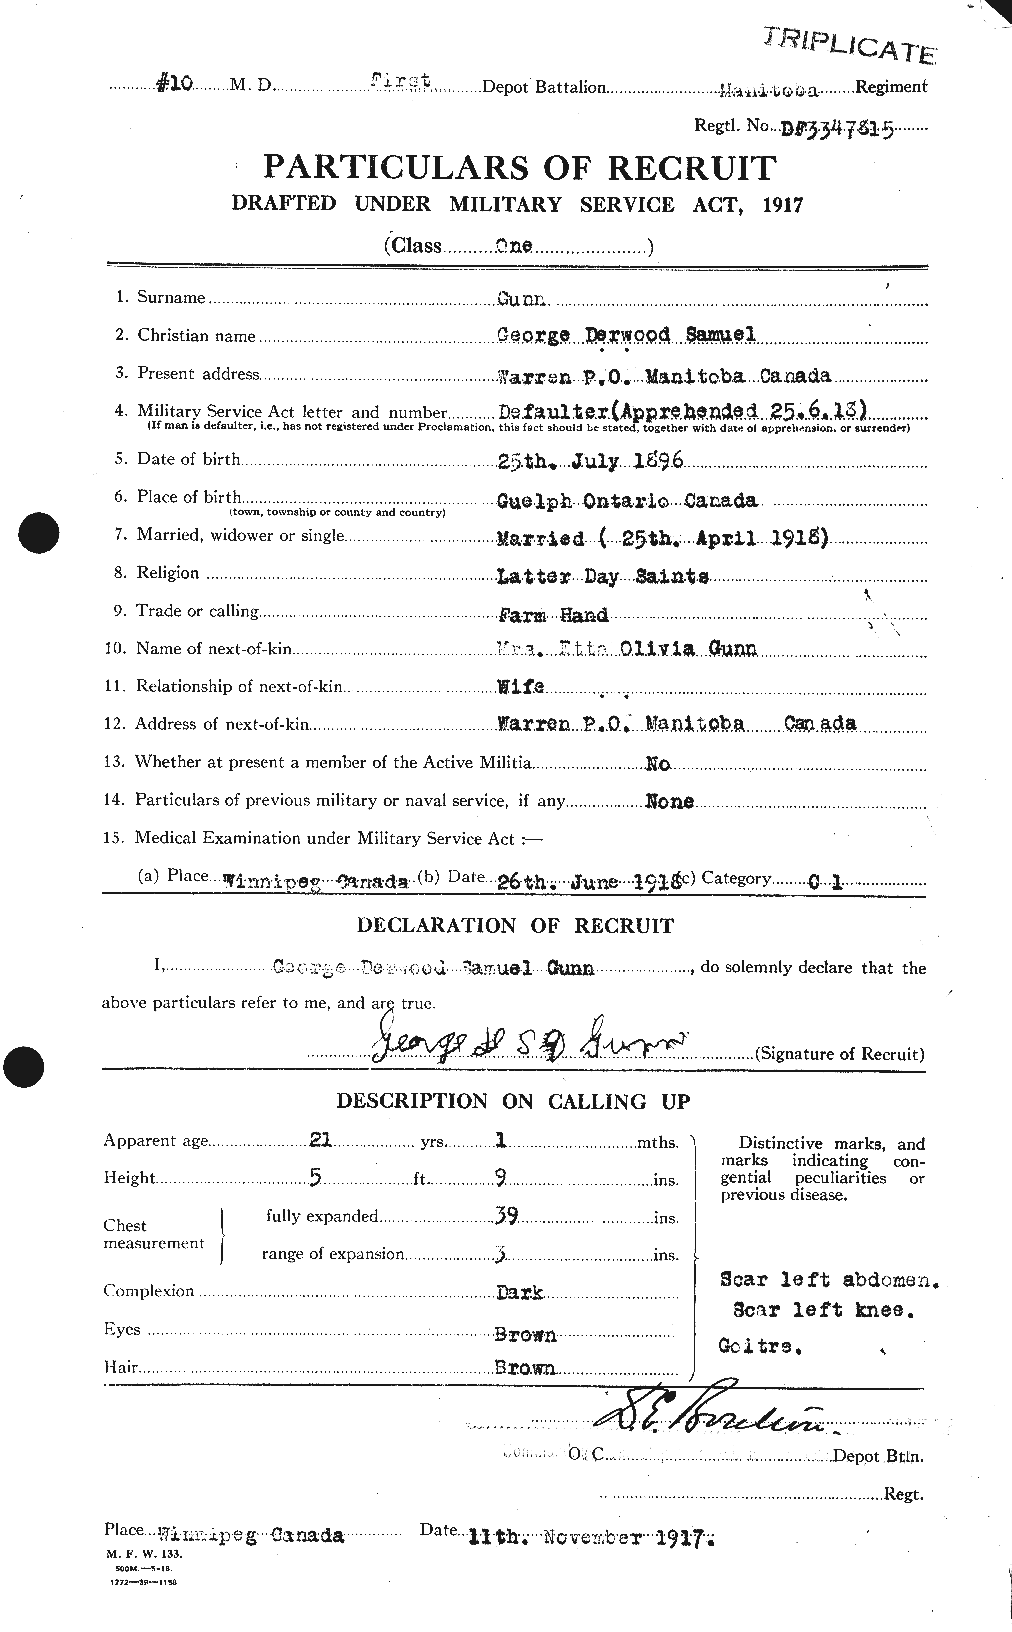 Personnel Records of the First World War - CEF 369413a